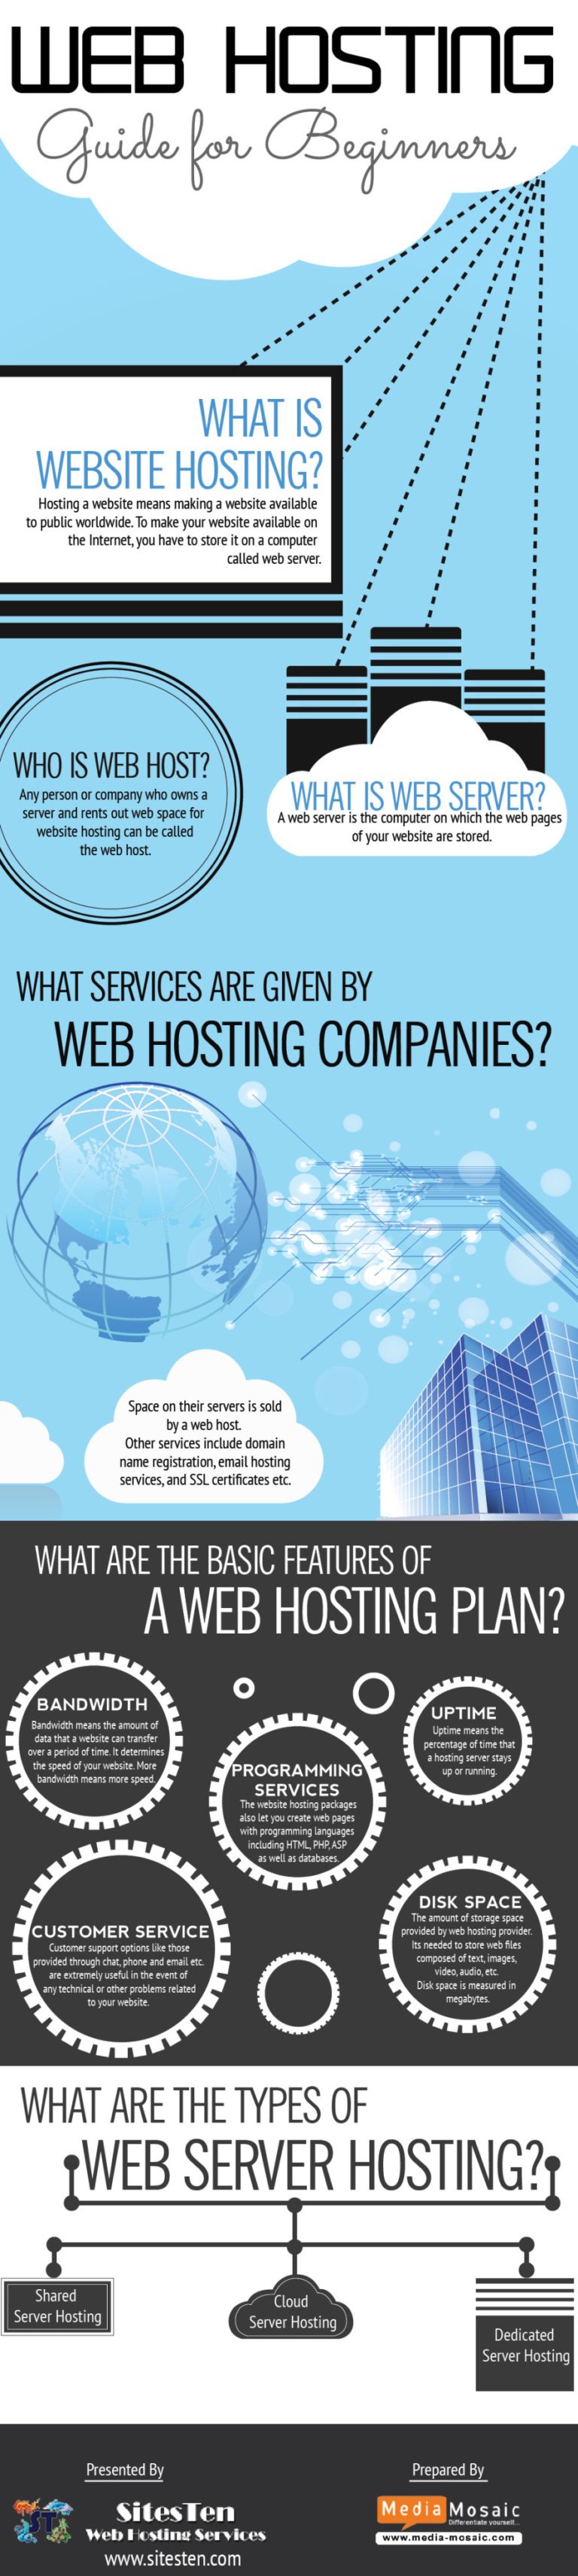 web-hosting-for-beginners-what-it-is-why-you-need-it1-1-768x3422